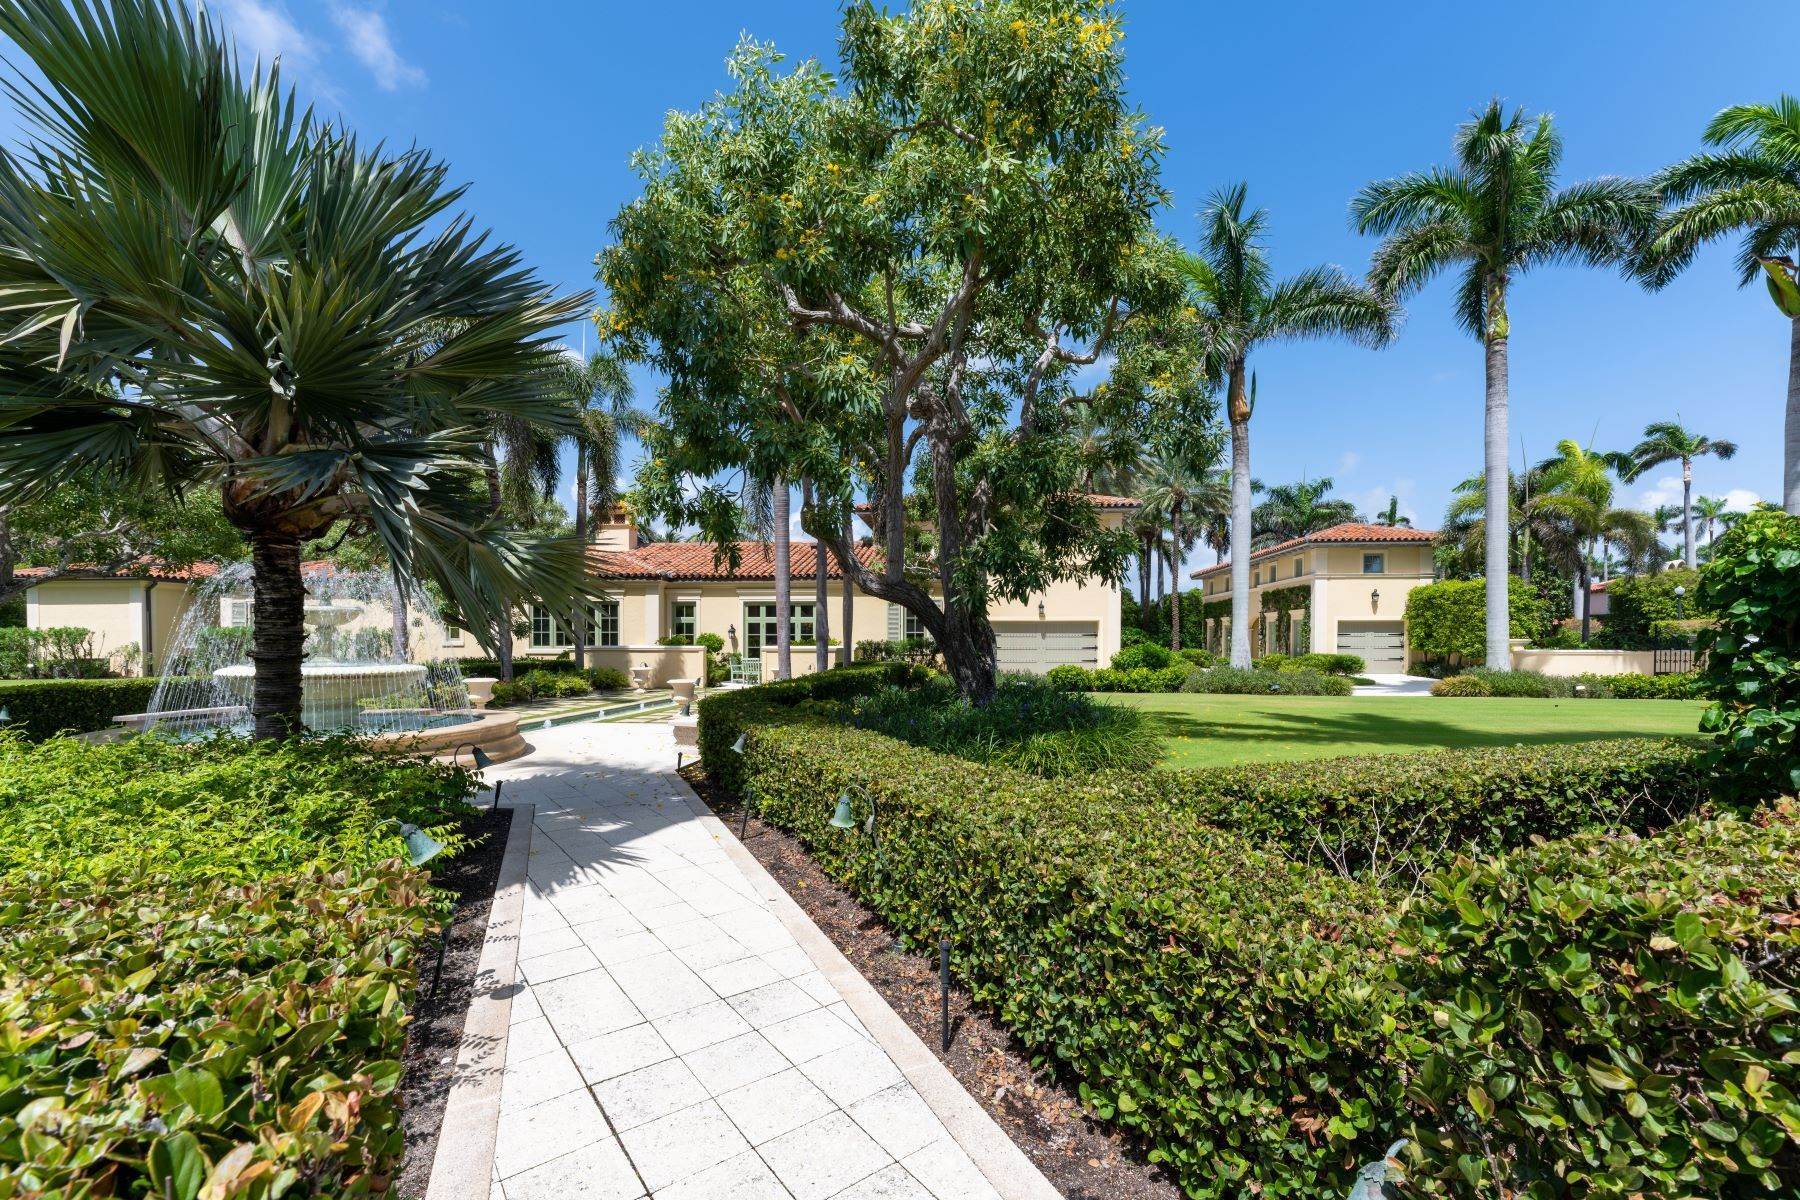 37. Single Family Homes for Sale at 1.5 Acre Palm Beach Estate 160 Clarendon Avenue Palm Beach, Florida 33480 United States